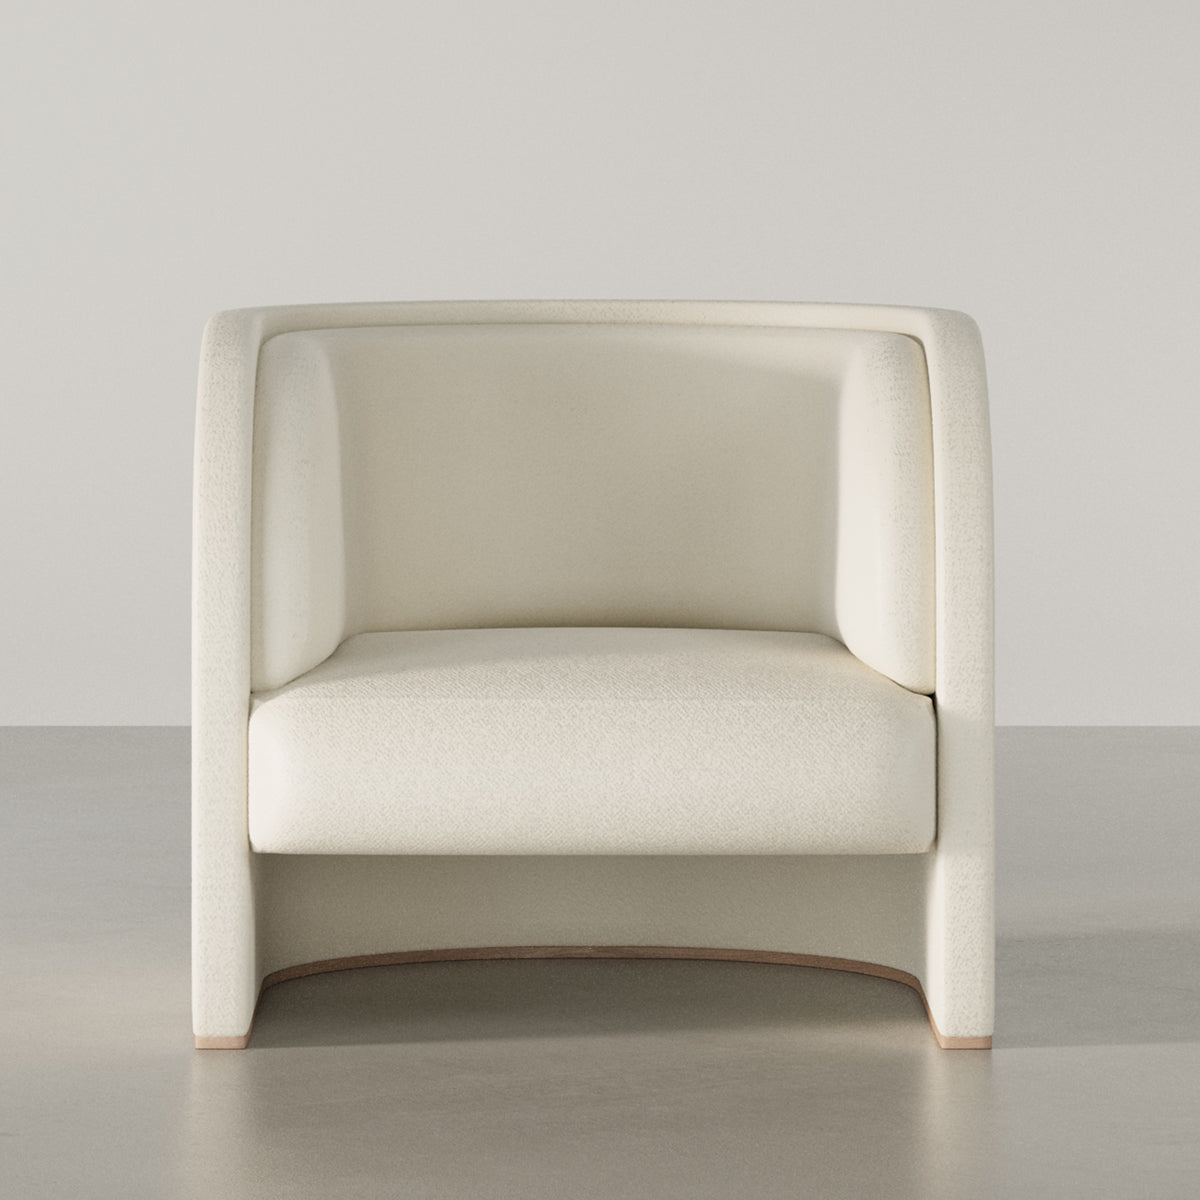 Lounge – Chair Abrego Amalfi Upholstered